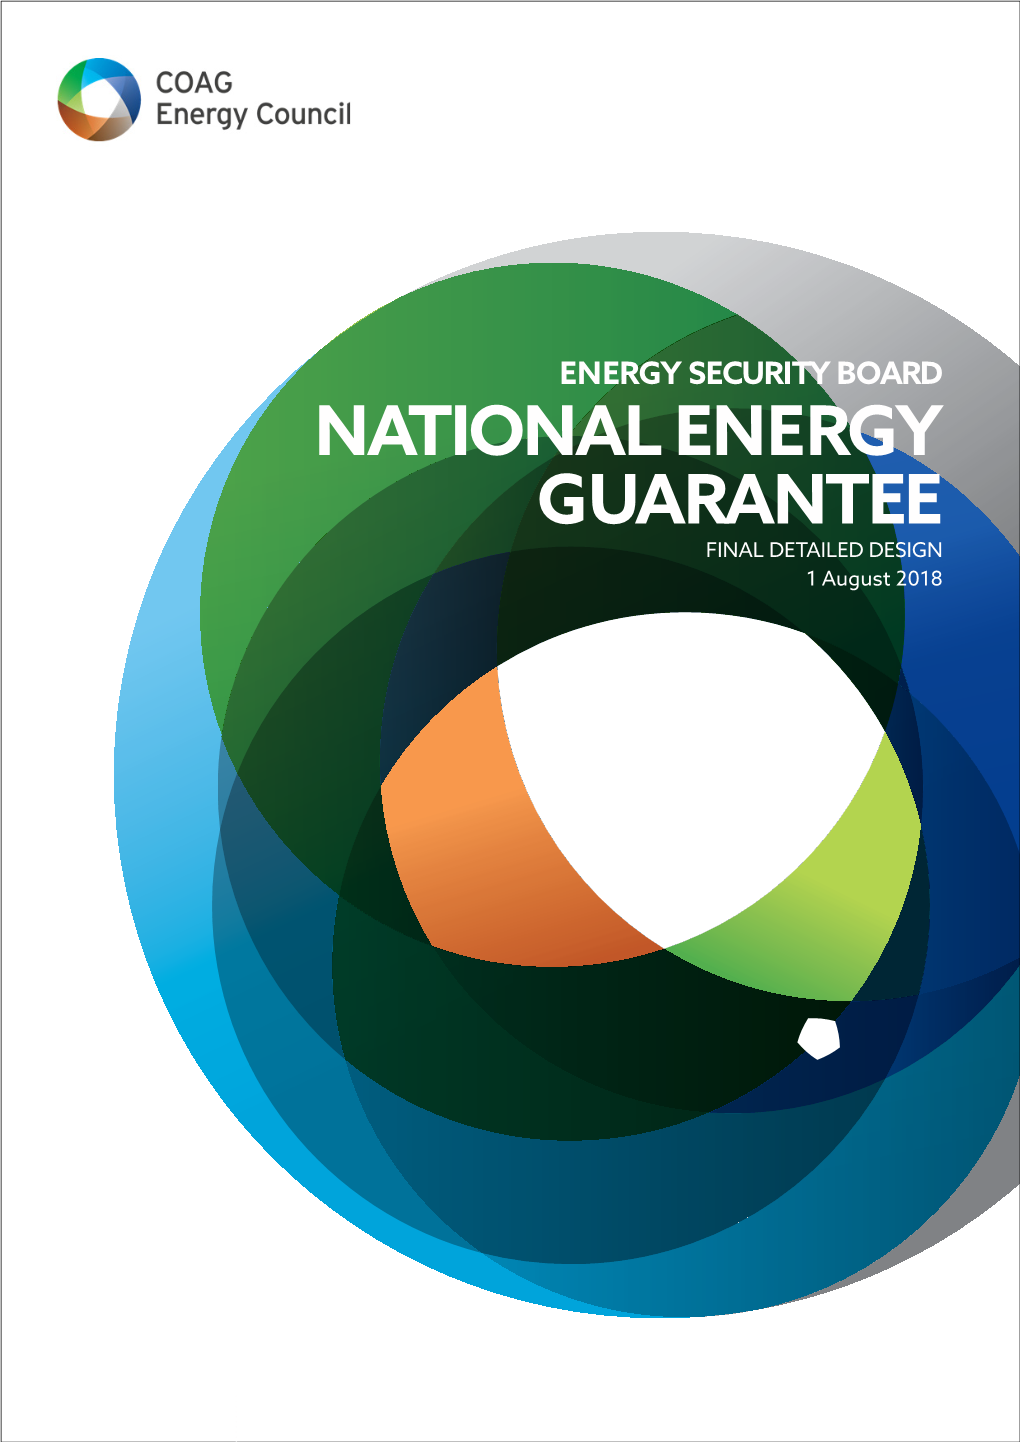 NATIONAL ENERGY GUARANTEE FINAL DETAILED DESIGN 1 August 2018 Dr Kerry Schott INDEPENDENT CHAIR Energy Security Board